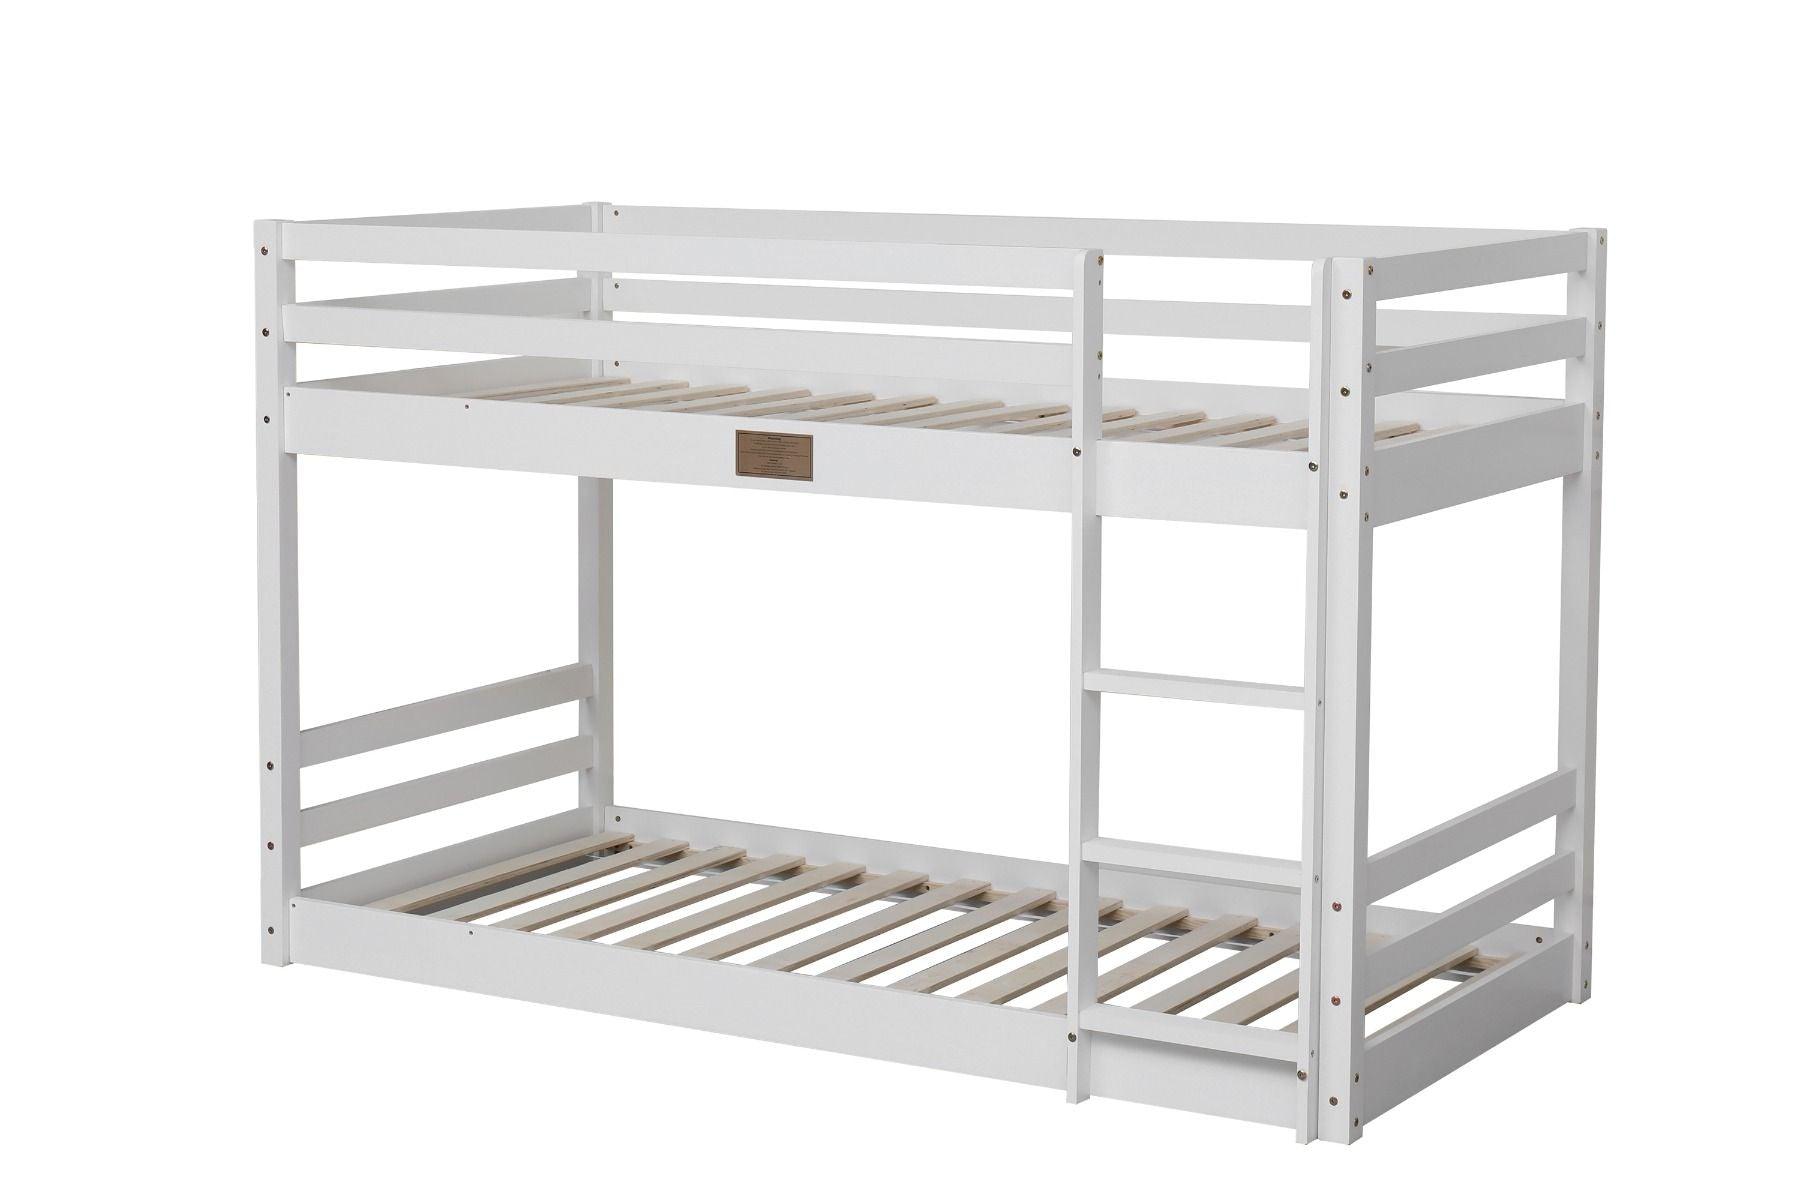 Spark Low Bunk Bed White Single Frame